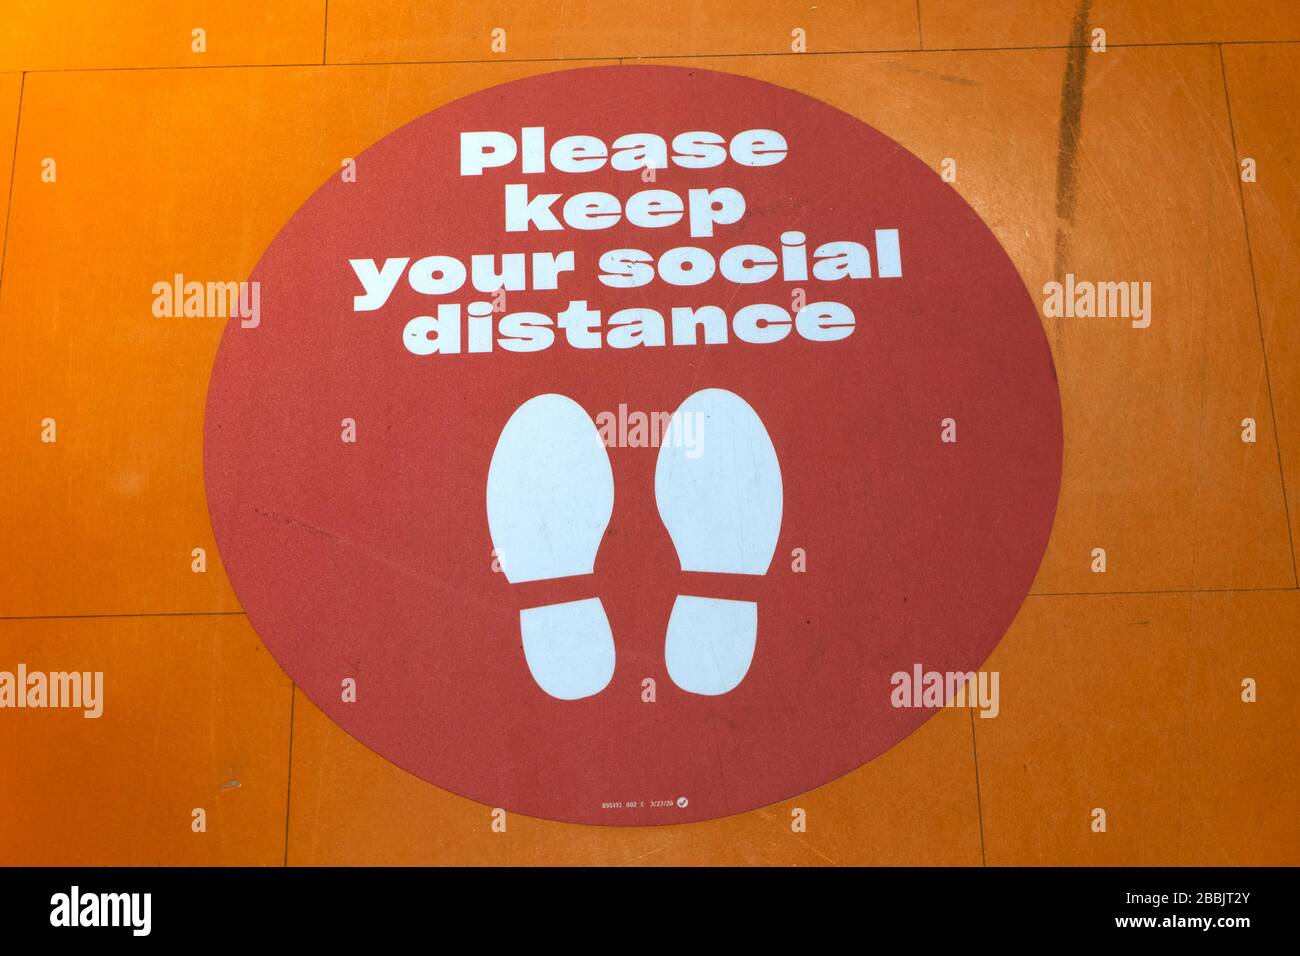 Vancouver, Canada, 31 March 2020. A sign on the floor of store reminds customers to practice social distancing  during the evolving COVD-19 pandemic. Stock Photo